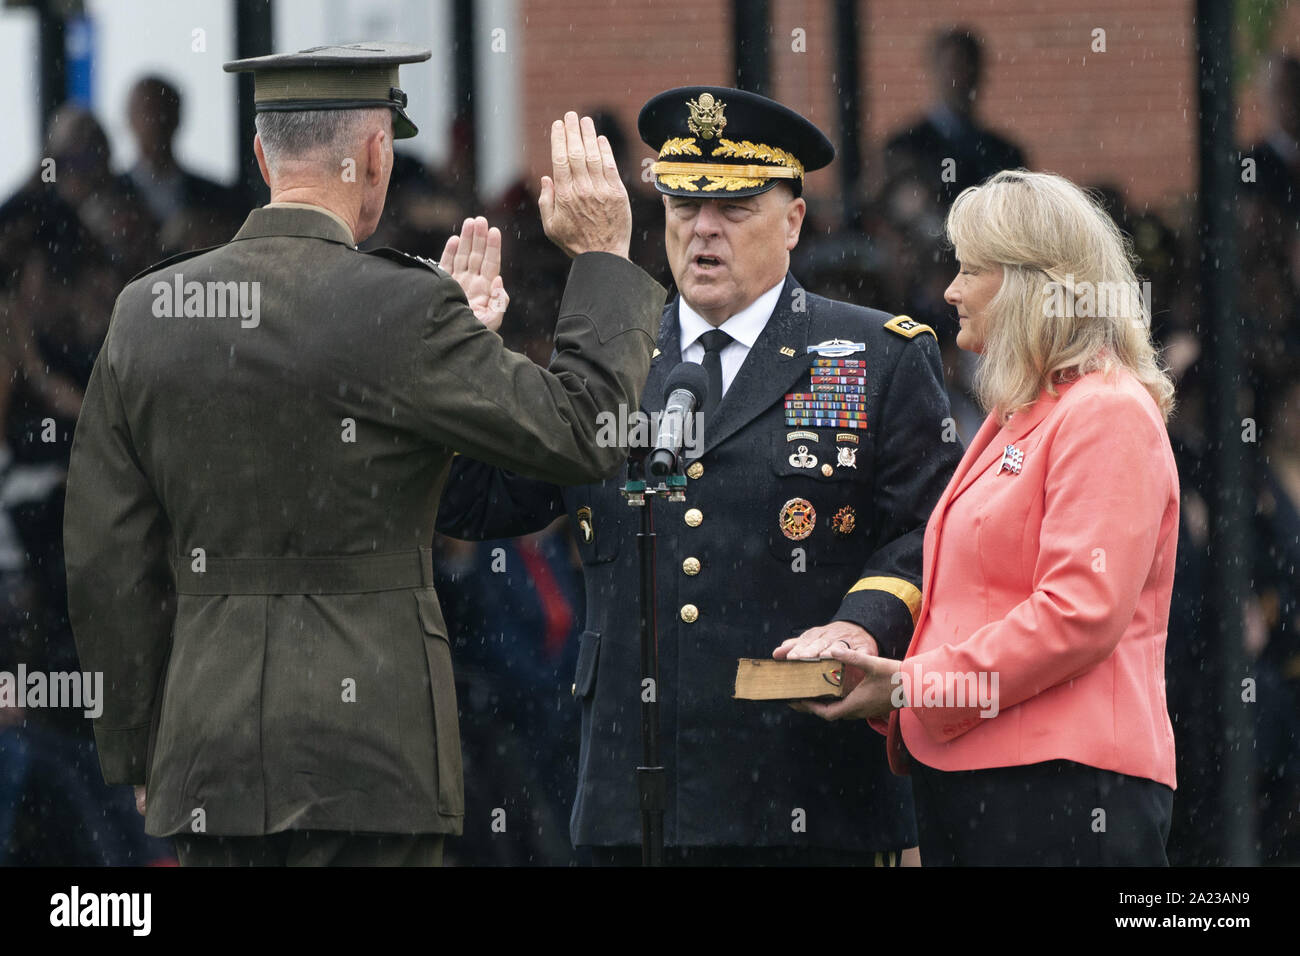 Arlington, United States. 30th Sep, 2019. Chairman of the Joint Chiefs of Staff Mark Milley is sworn in by outgoing chairman General Joseph Dunford during the Armed Forces Welcome Ceremony in honor Milley being appointed as the Twentieth Chairman of the Joint Chiefs of Staff at Joint Base Myer in Arlington, Virginia on September 30, 2019. Photo by Chris Kleponis/UPI Credit: UPI/Alamy Live News Stock Photo